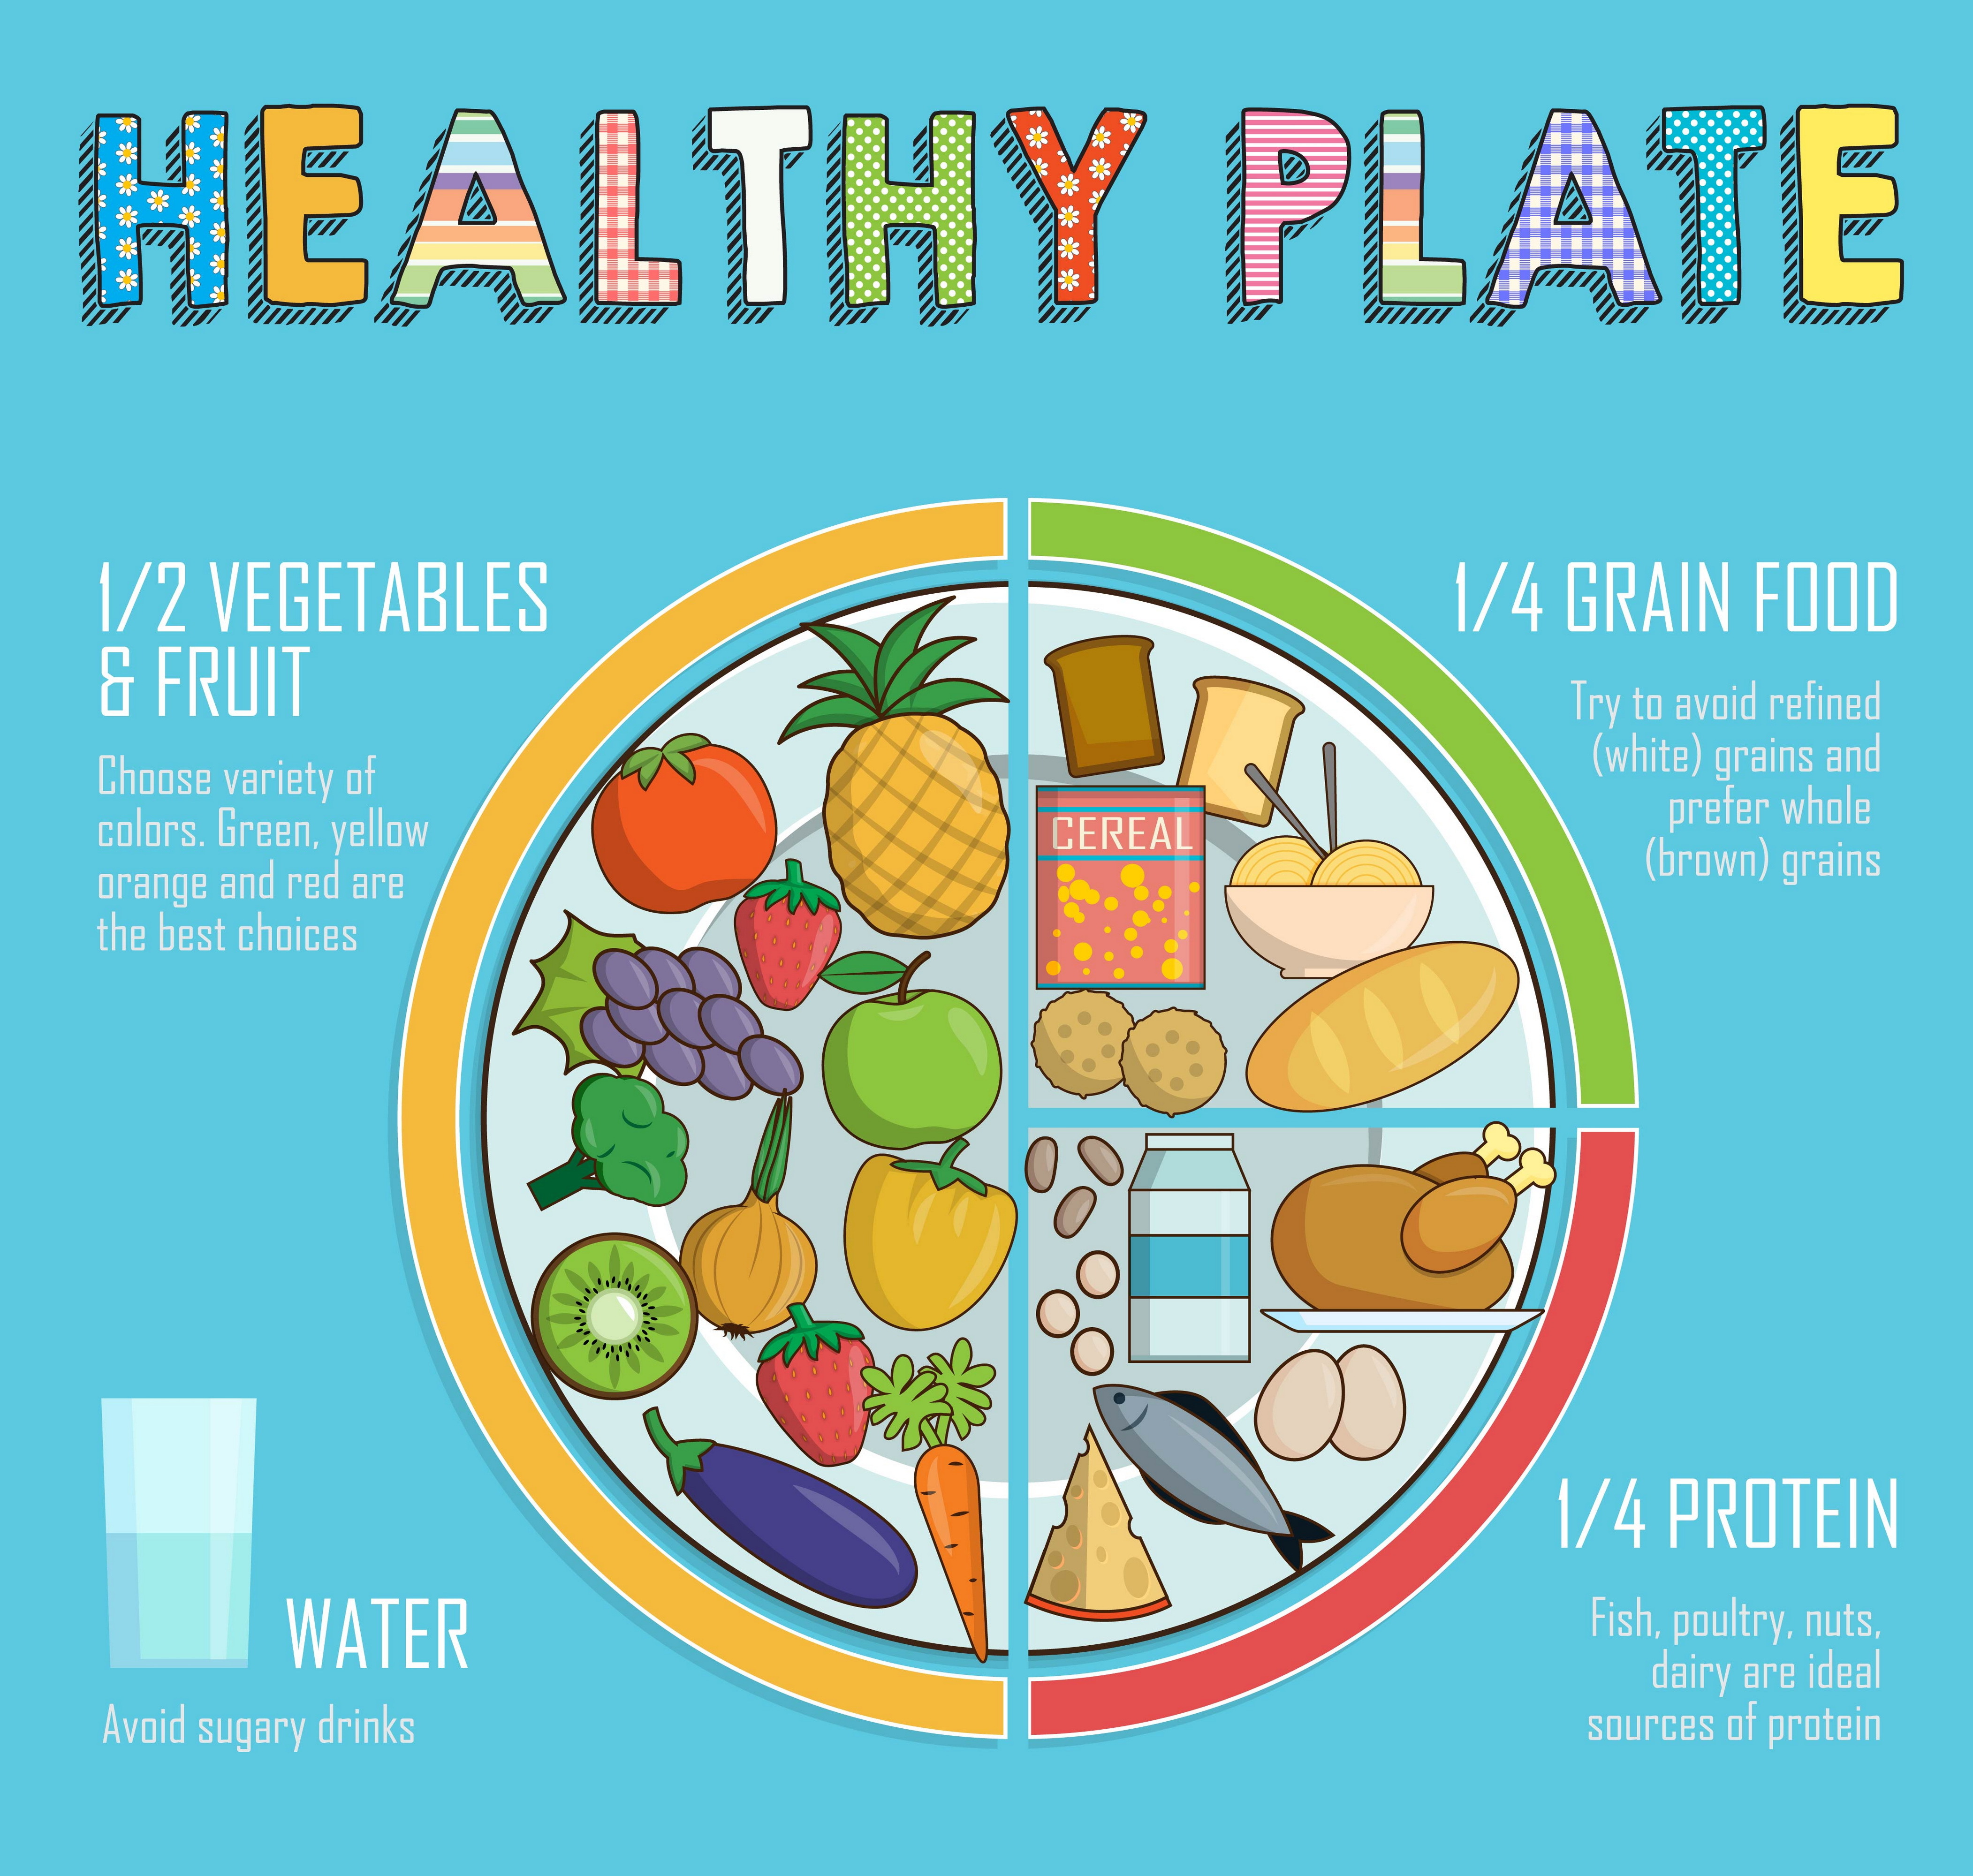 How your plate should be composed?